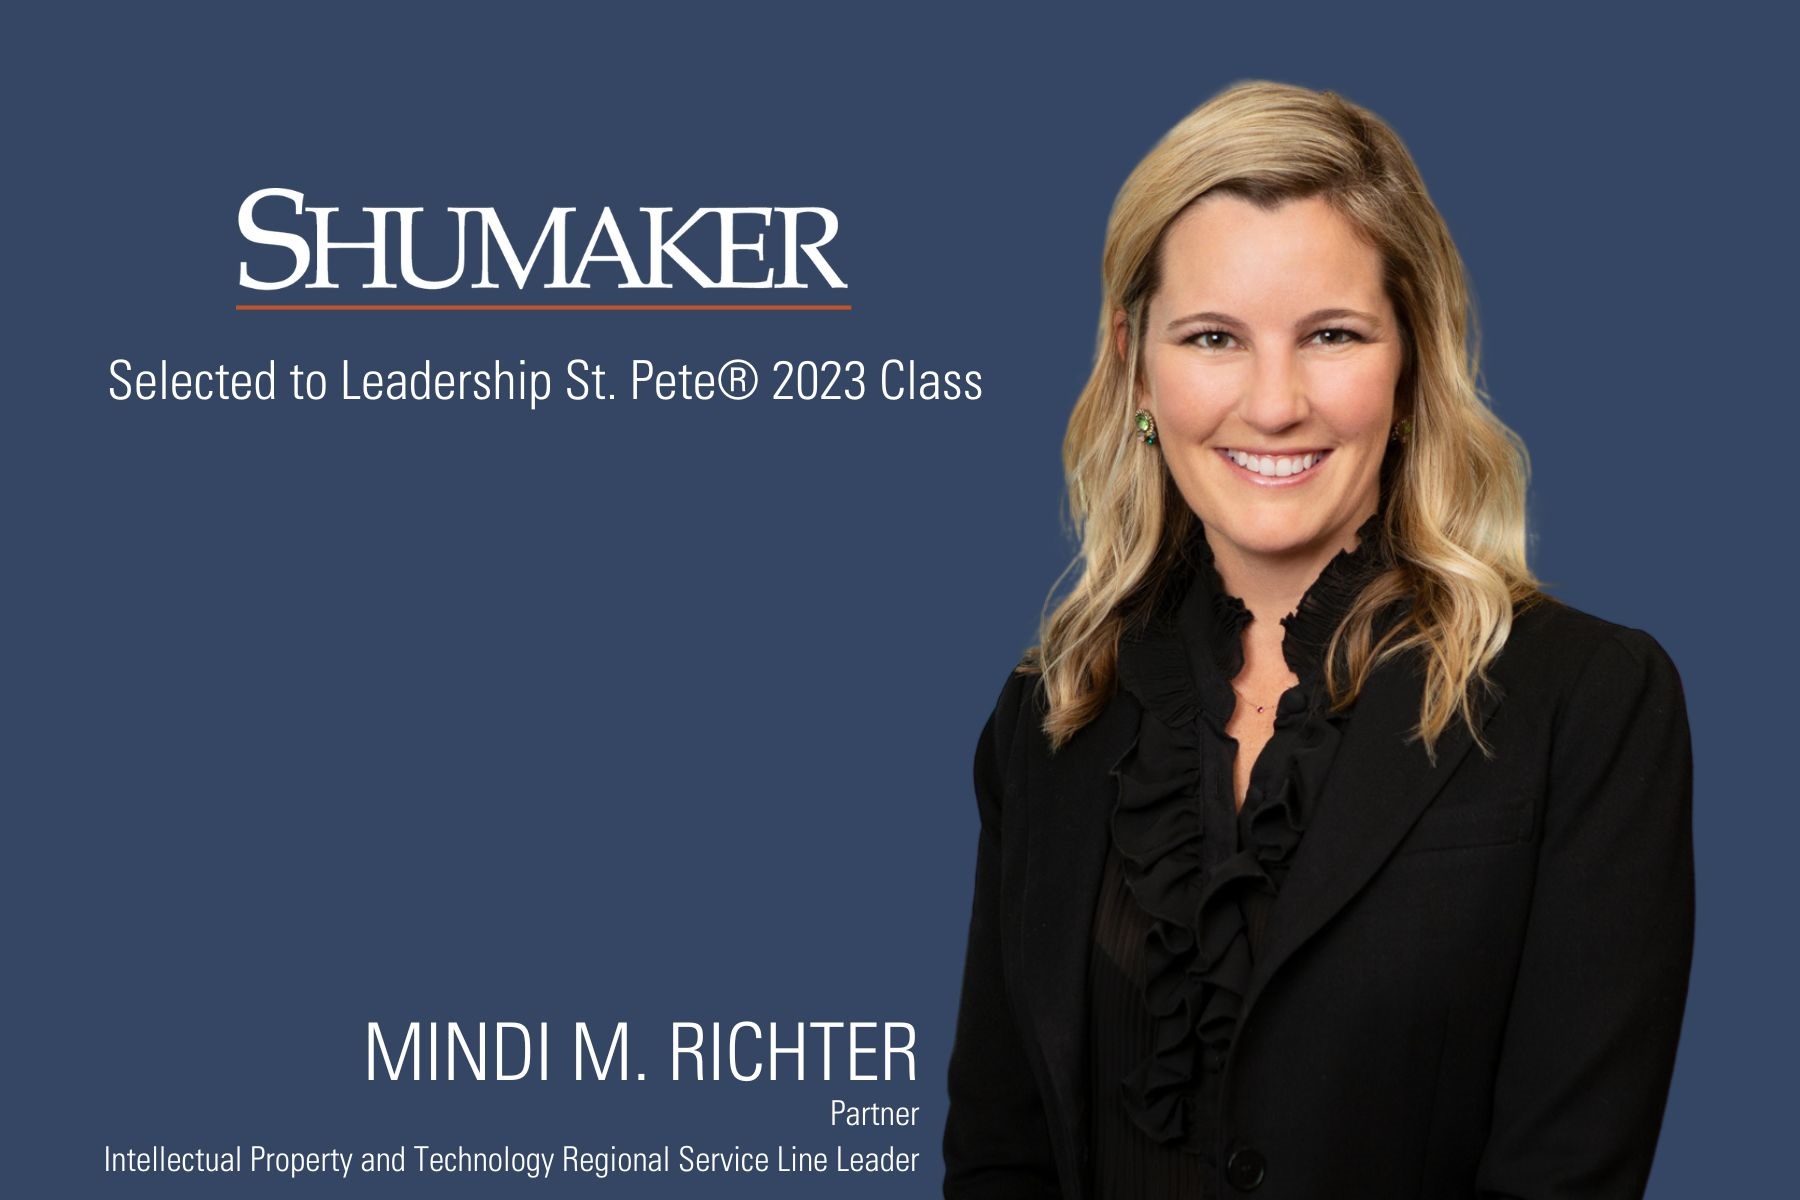 Shumaker’s Commitment to St. Petersburg Continues: Mindi M. Richter Selected to Leadership St. Pete® 2023 Class